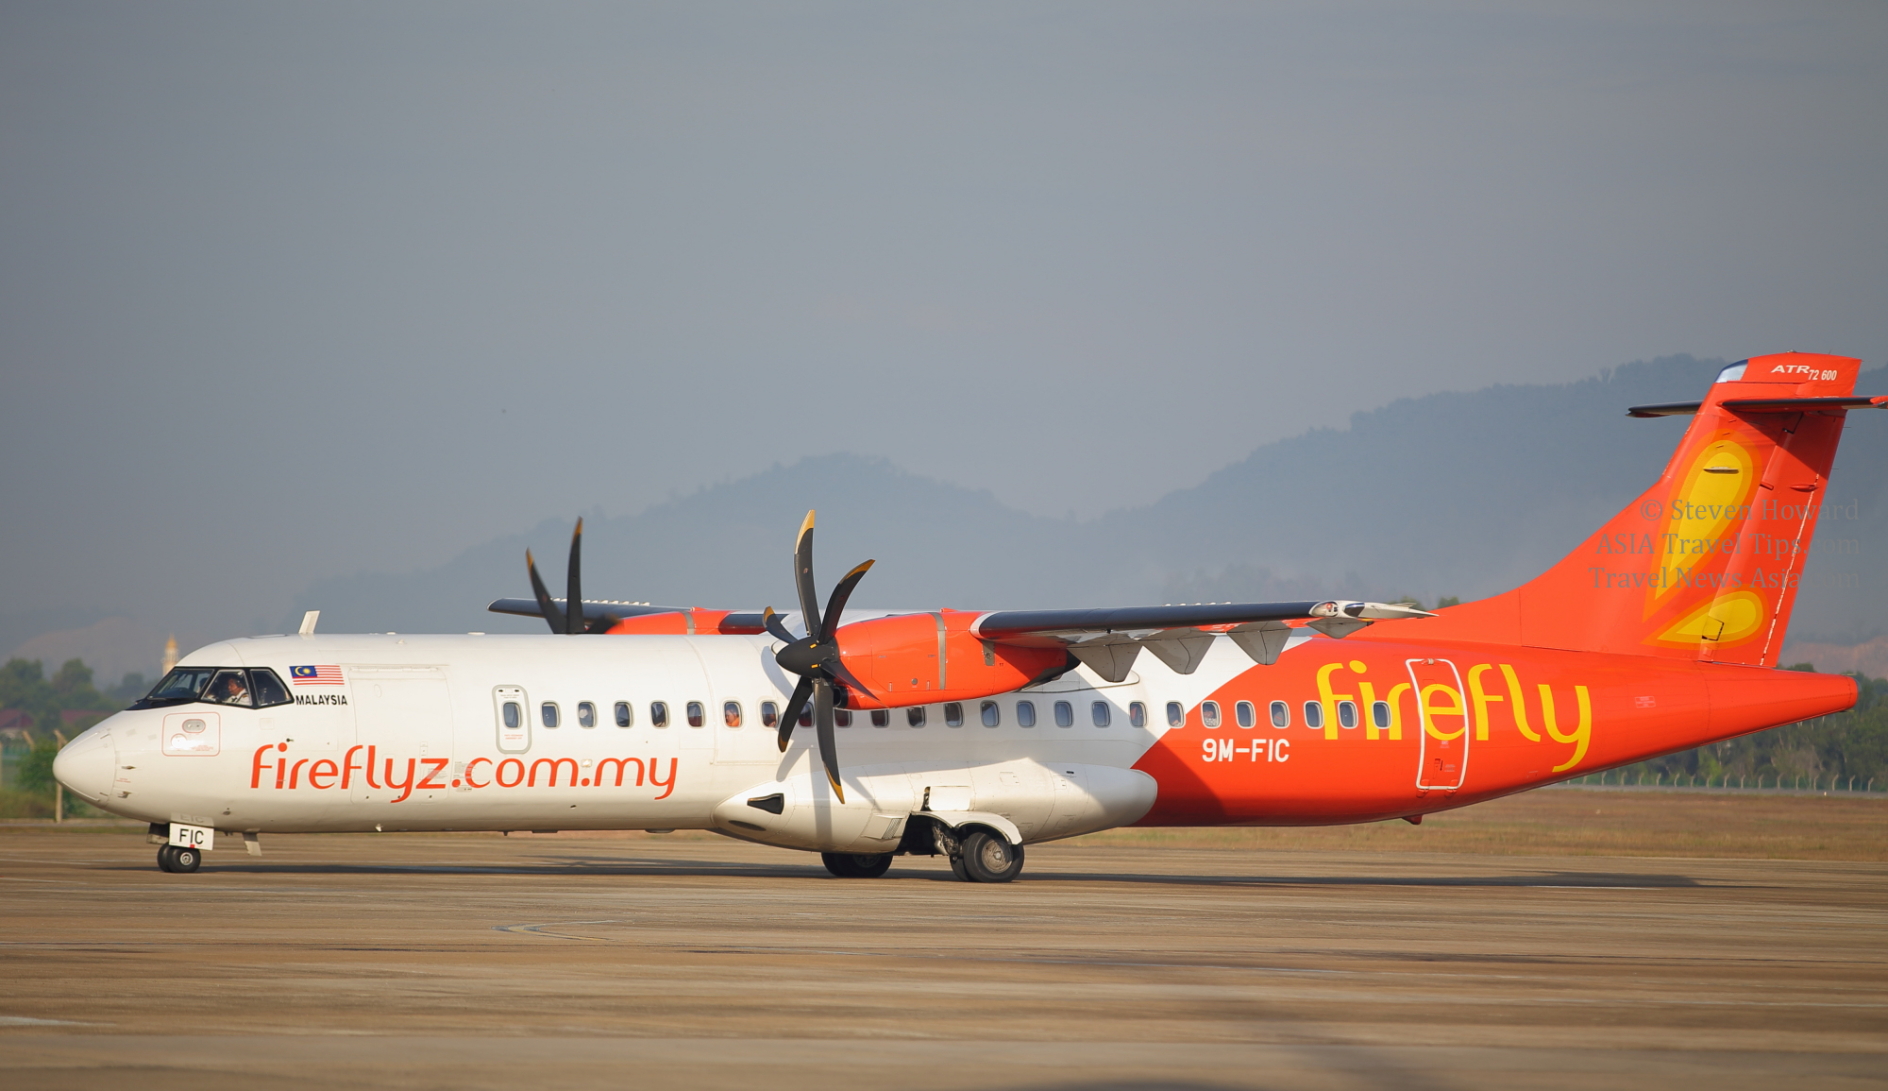 Firefly ATR 72-600 reg 9M-FIC. Picture by Steven Howard of TravelNewsAsia.com Click to enlarge.